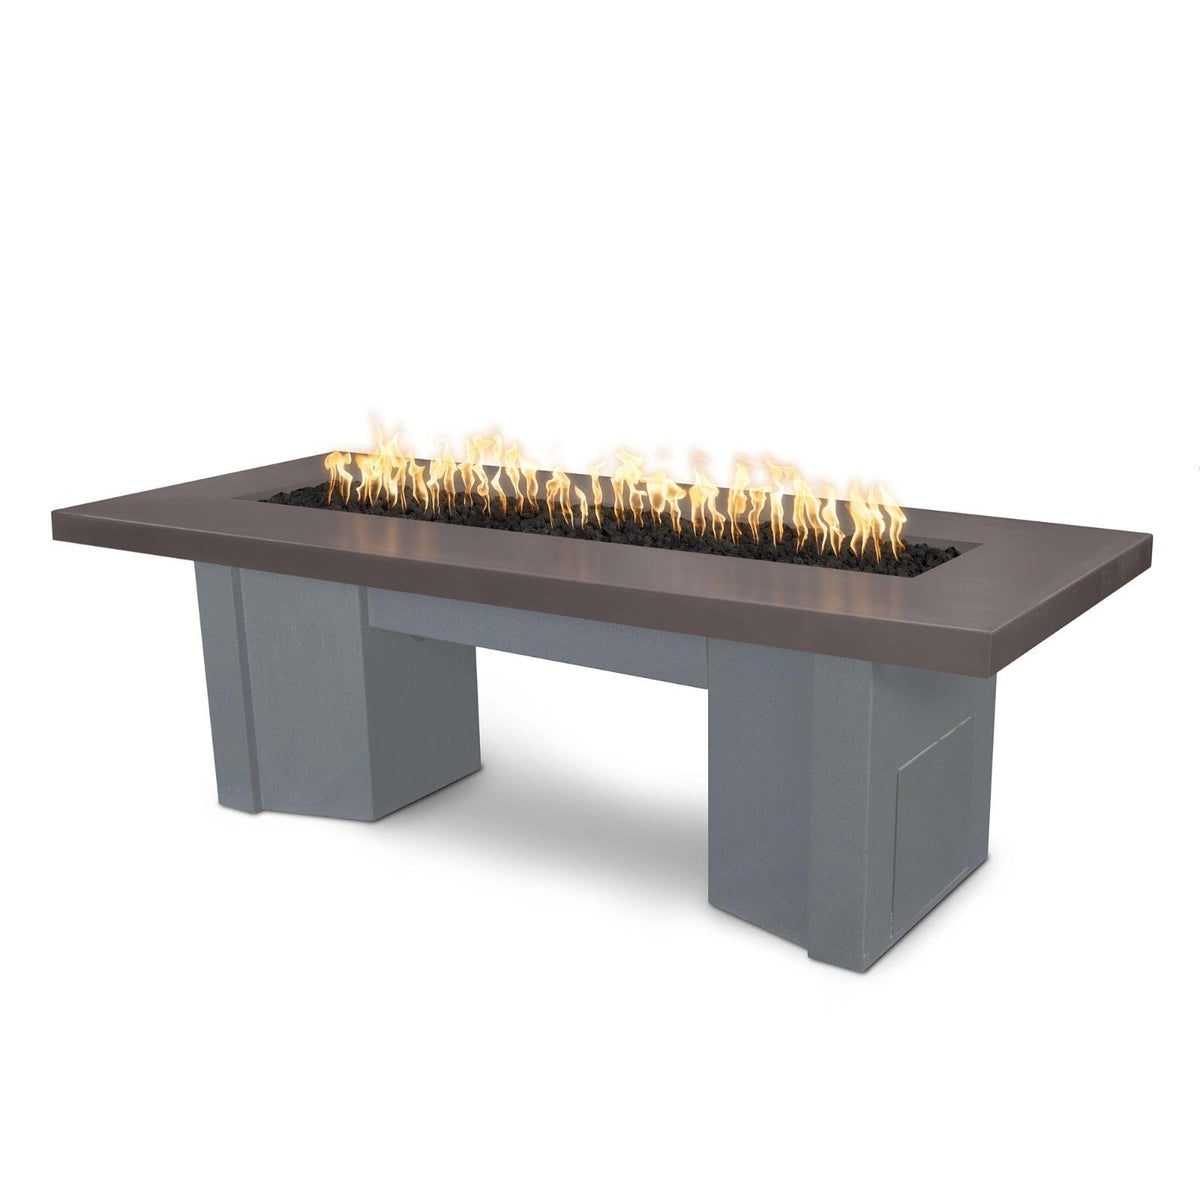 The Outdoor Plus Fire Features Chestnut (-CST) / Gray Powder Coated Steel (-GRY) The Outdoor Plus 60&quot; Alameda Fire Table Smooth Concrete in Liquid Propane - Match Lit with Flame Sense System / OPT-ALMGFRC60FSML-LP